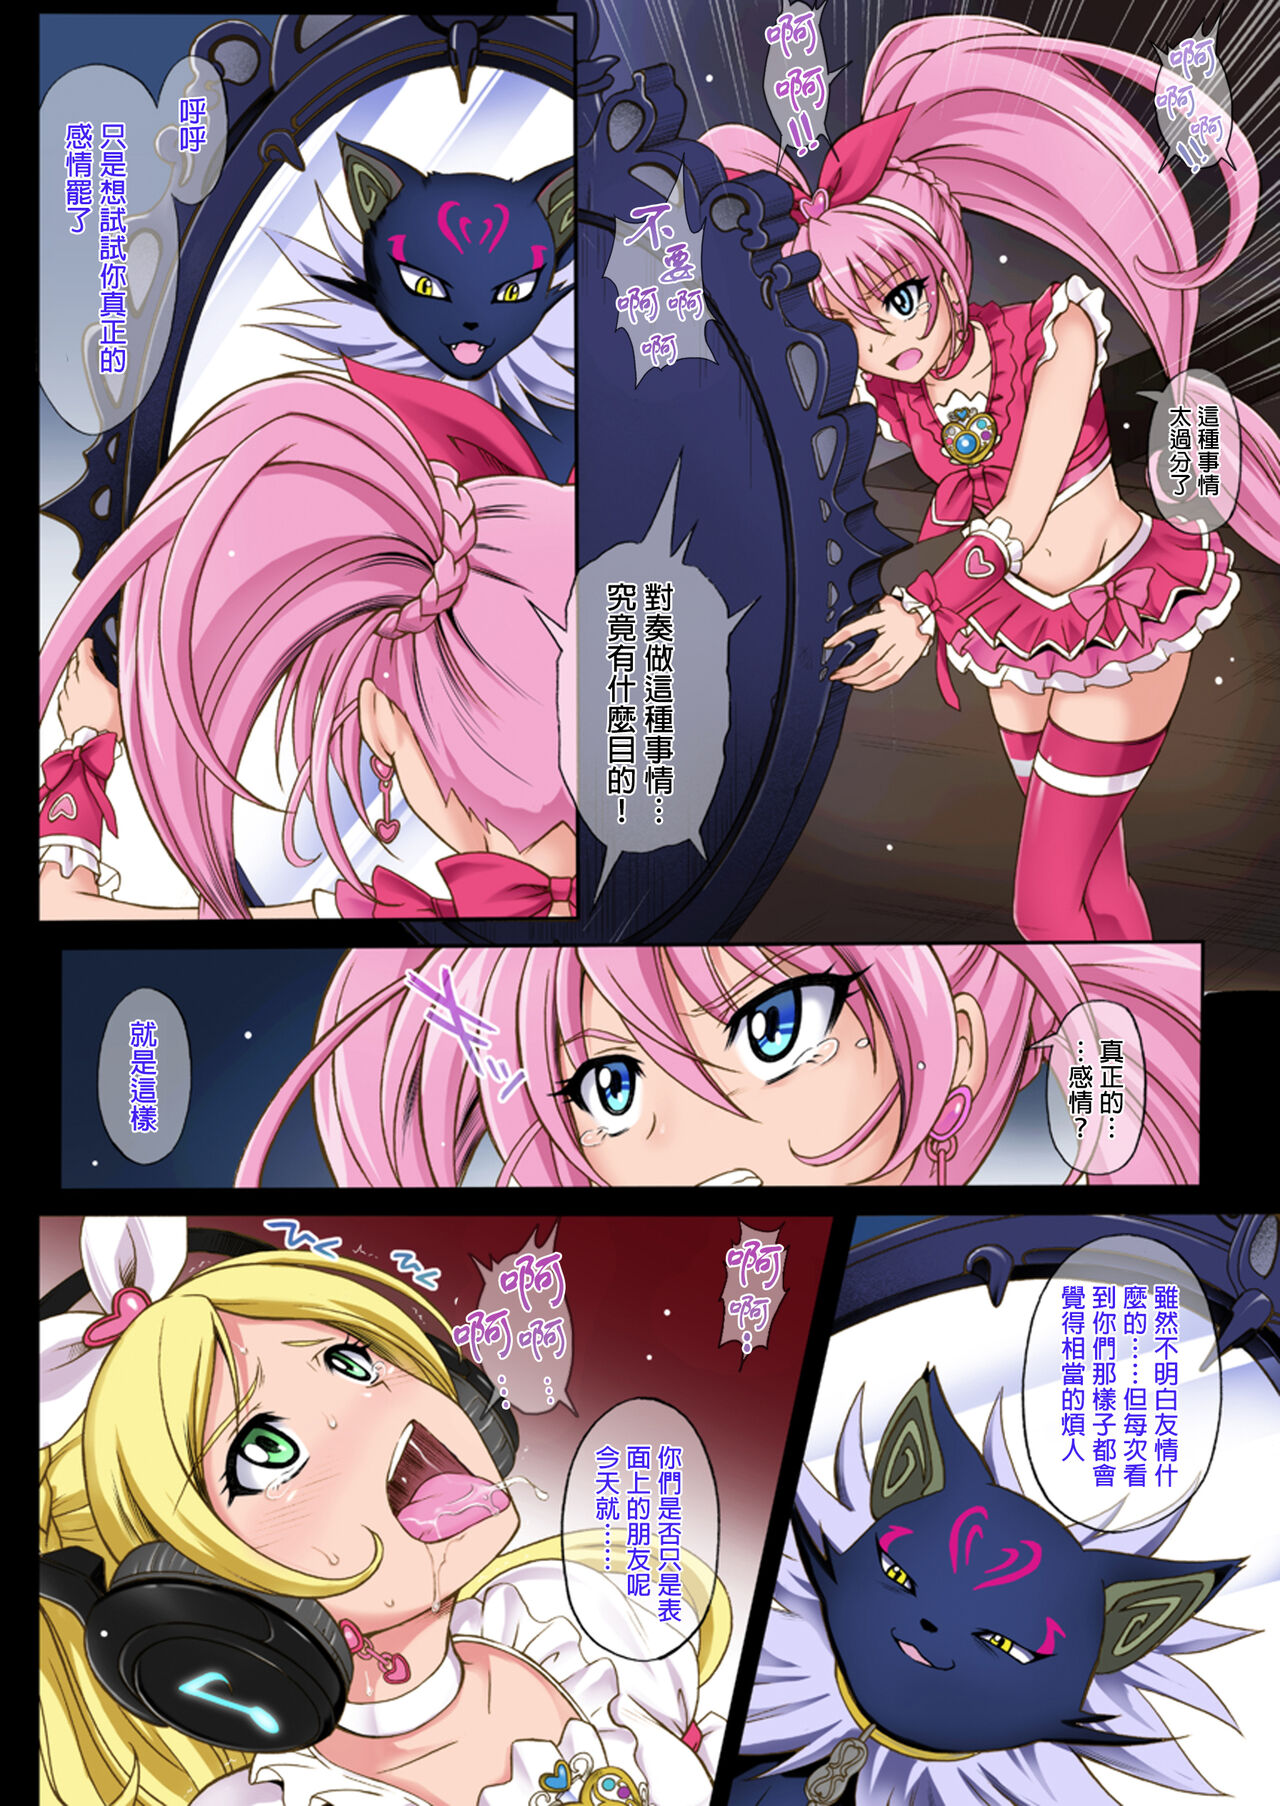 [Cyclone (Izumi, Reizei)] Cyclone no Full Color Pack1 "Sui-Sui" (Suite Precure) [Digital][Chinese][桃樹漢化組×流砂個人漢化] [サイクロン (和泉、冷泉)] サイクロンのフルカラーパック1「Sui-Sui」 (スイートプリキュア♪) [DL版][中国翻訳]